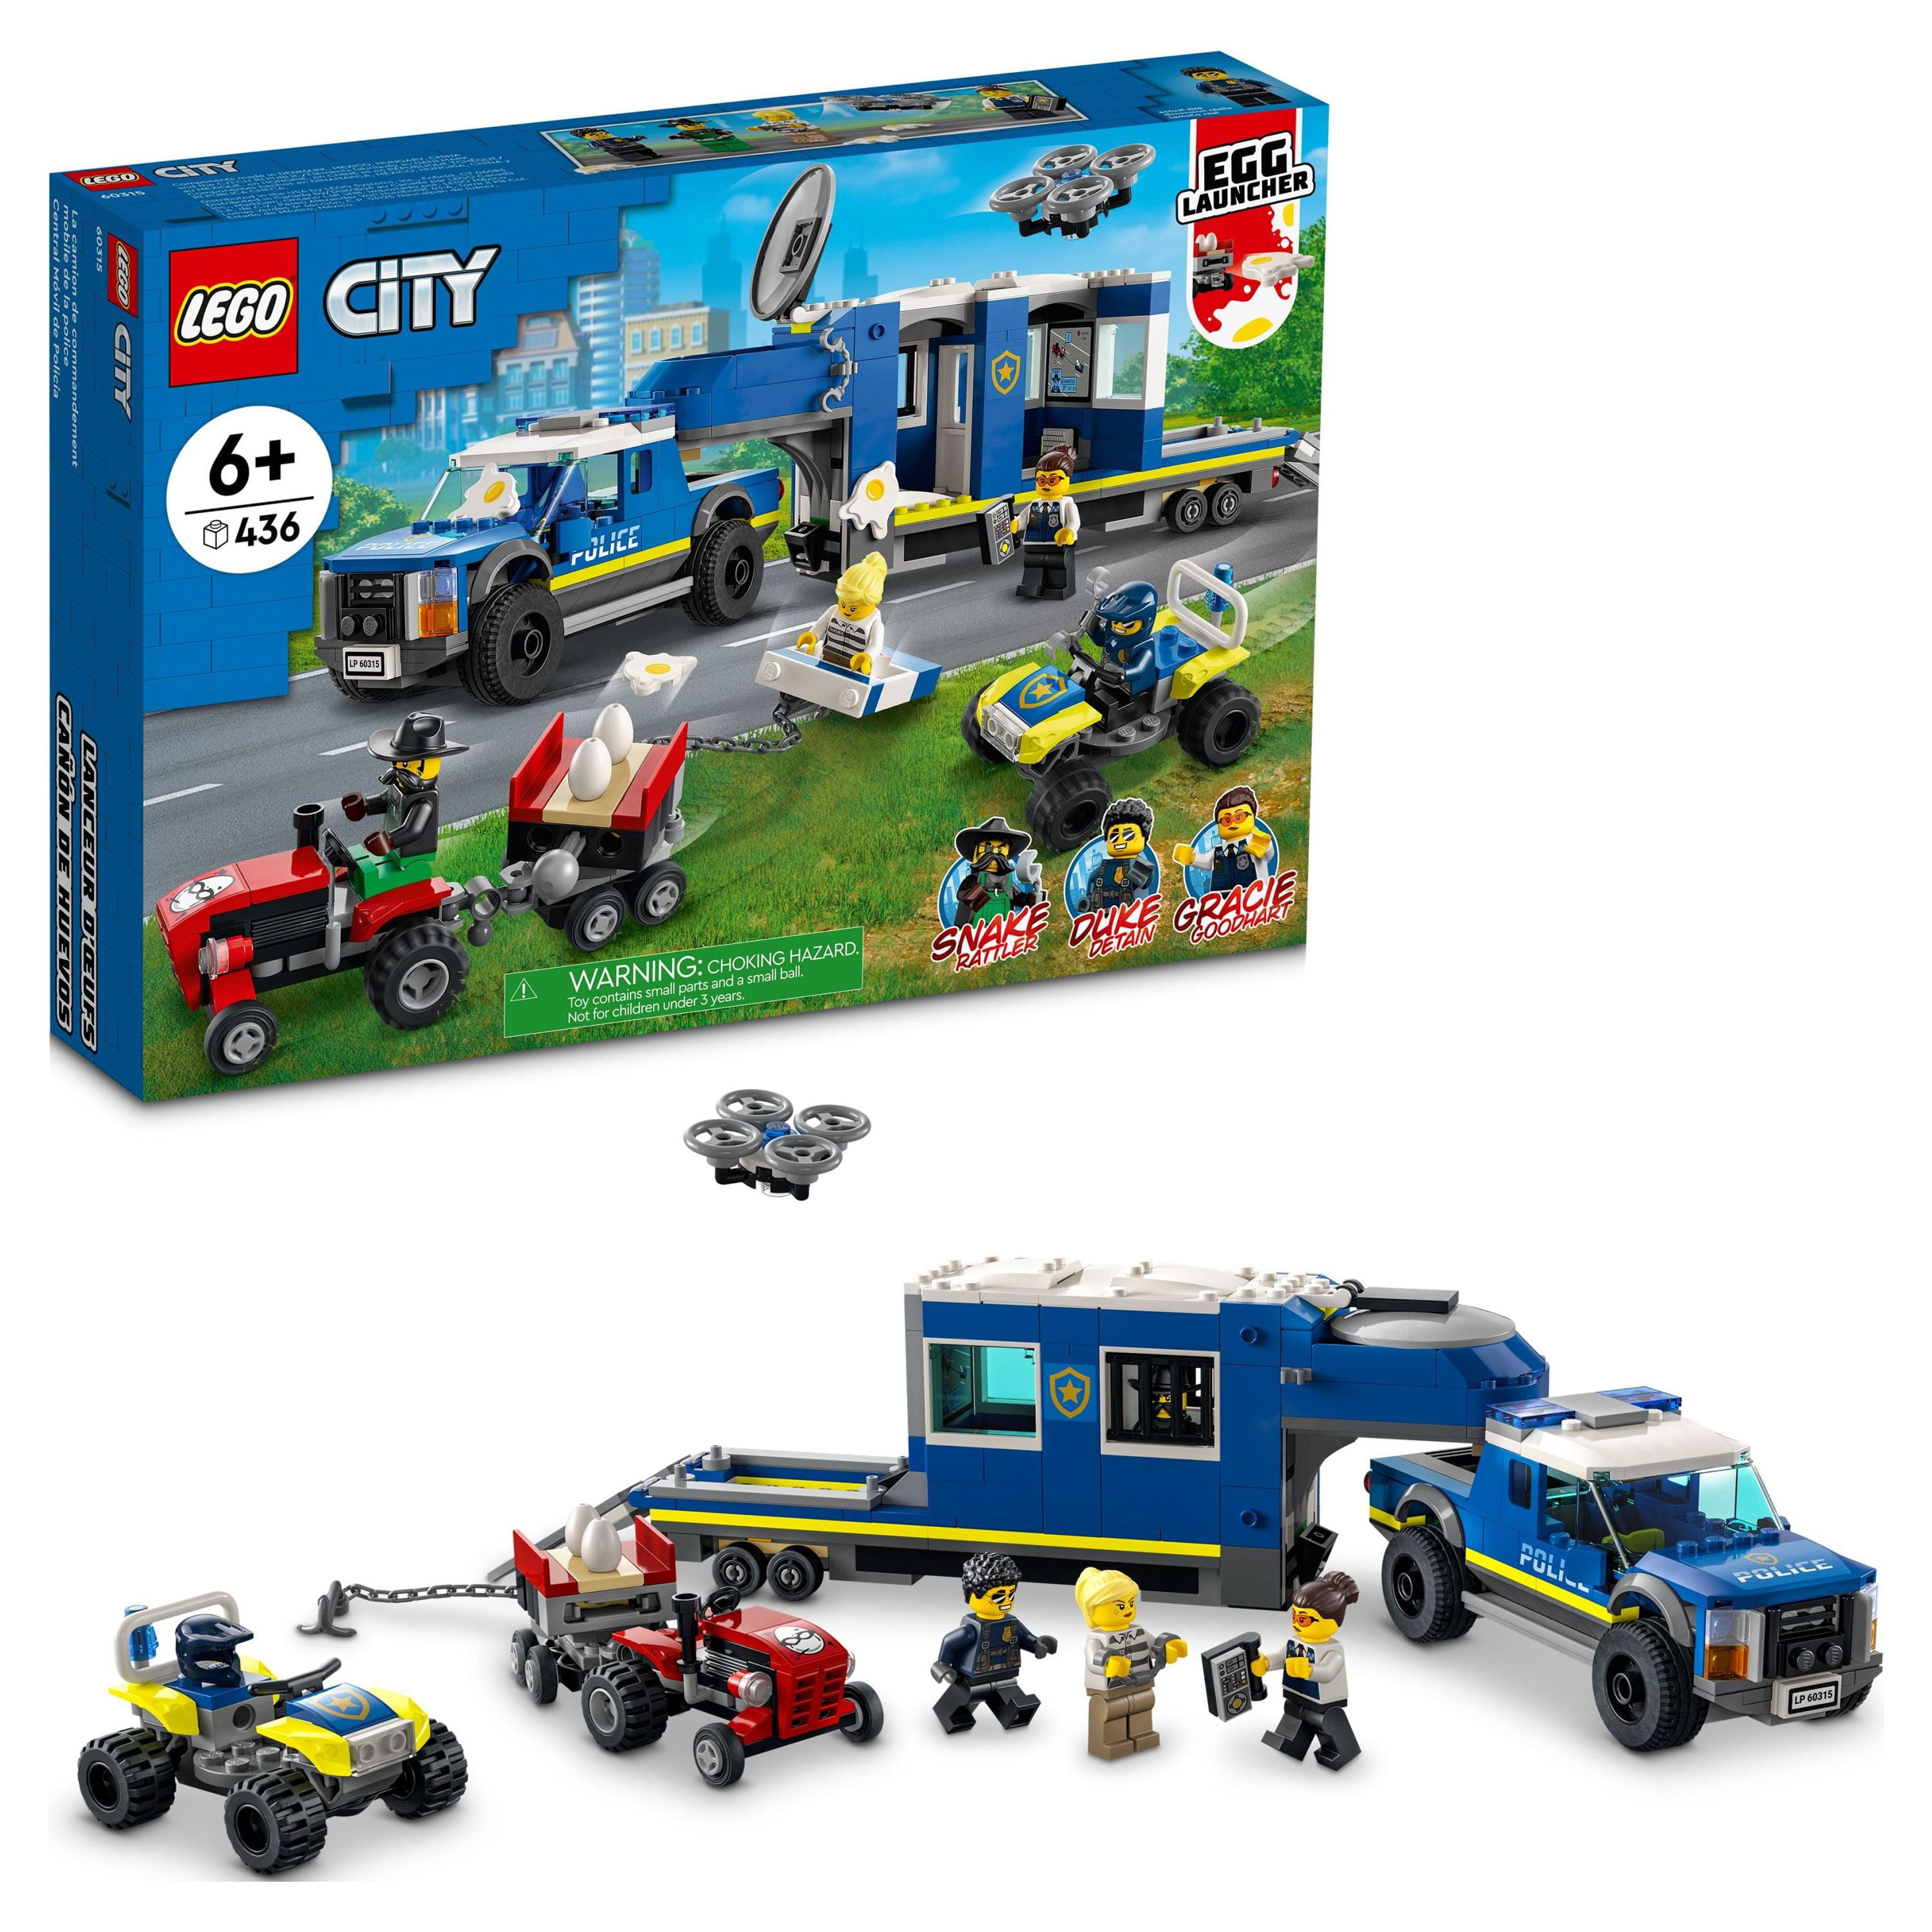 LEGO City Police Mobile Command Truck Toy, 60315 with Prison Trailer,  Drone, Tractor and ATV Car Toys plus 4 Minifigures, Presents for Kids Age 6  Plus